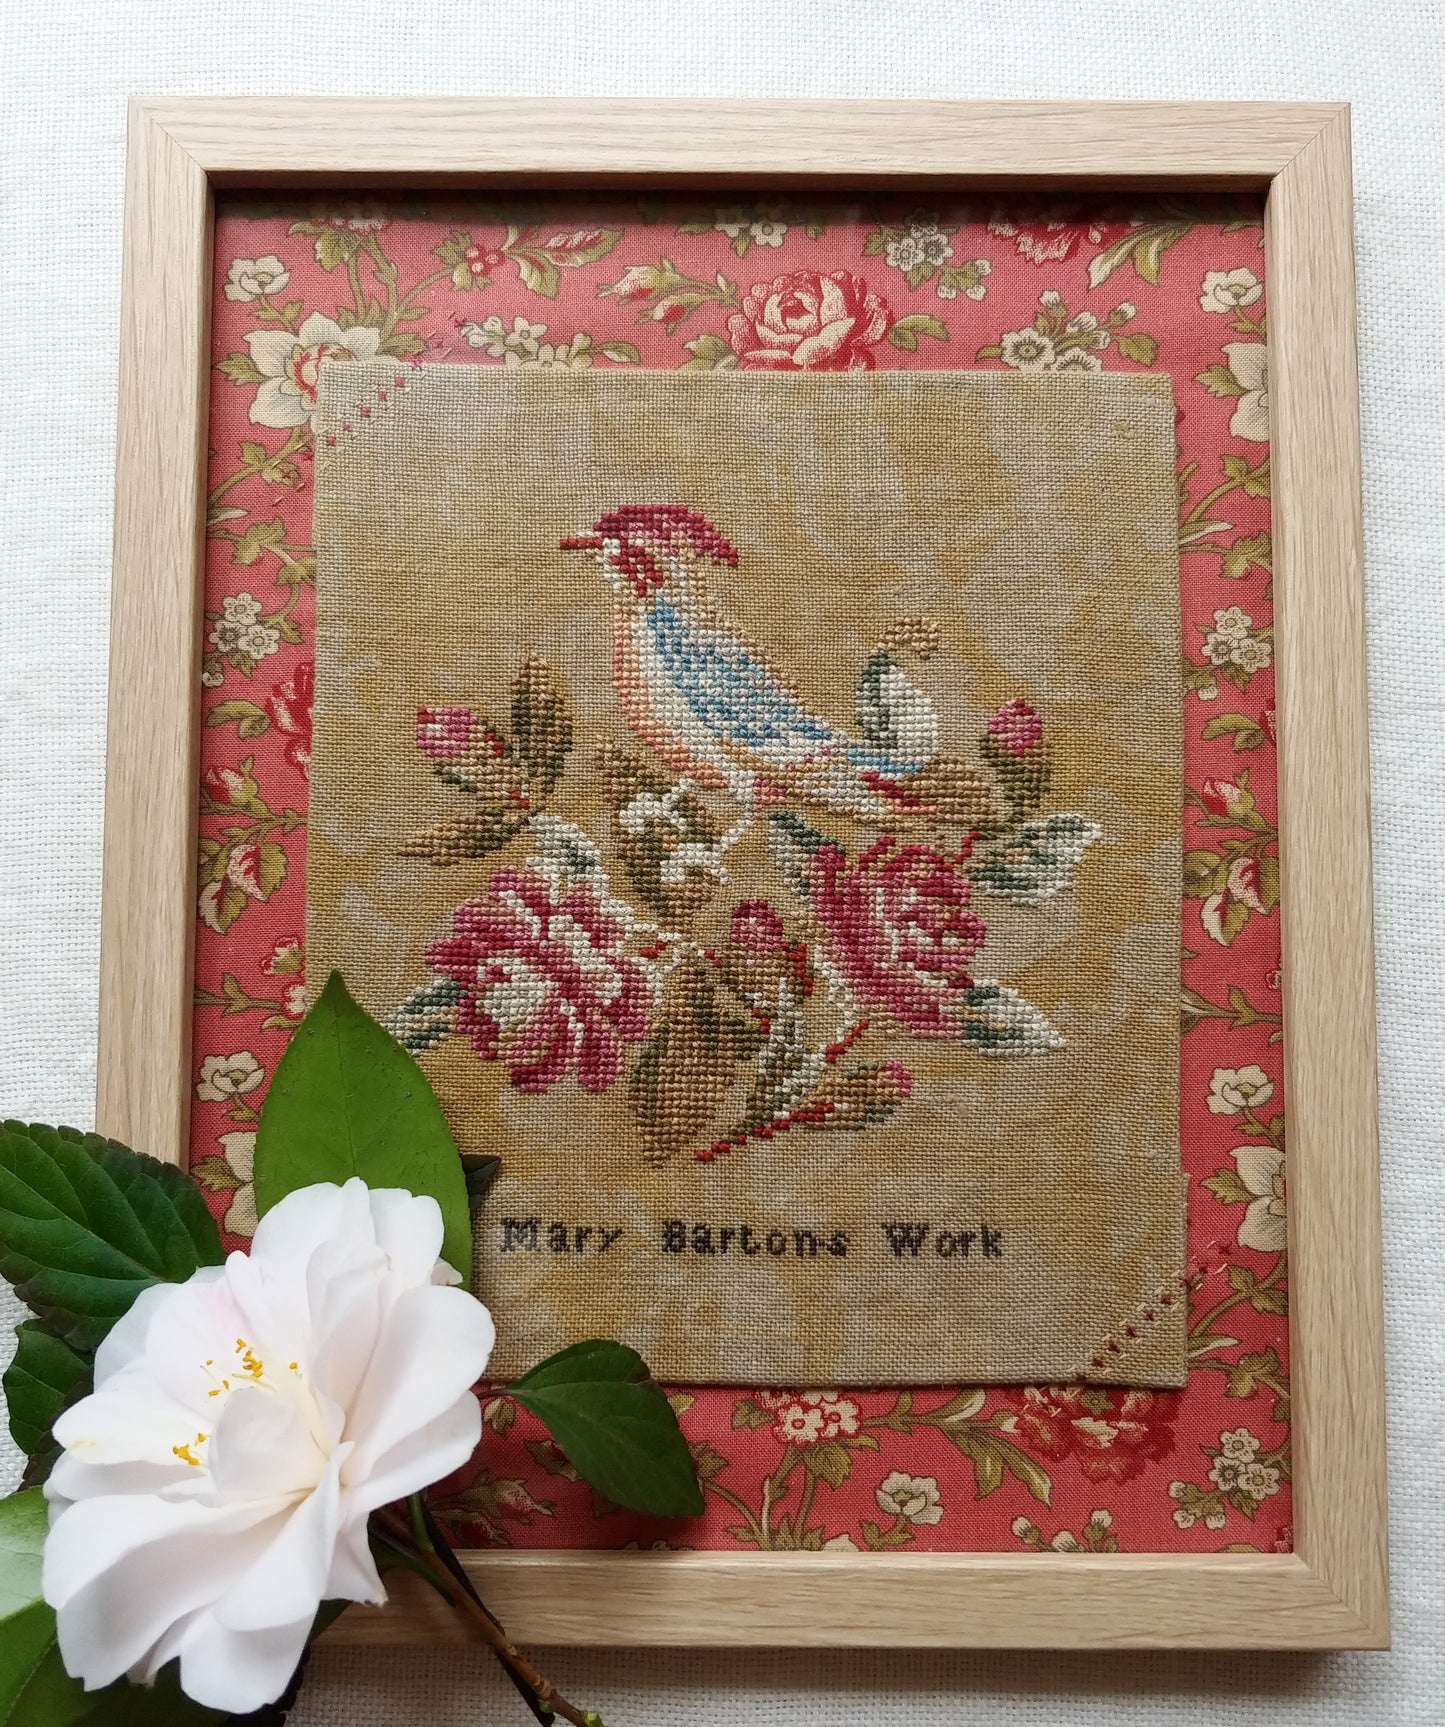 Mary Barton's Work - Reproduction Pattern by Mojo Stitches